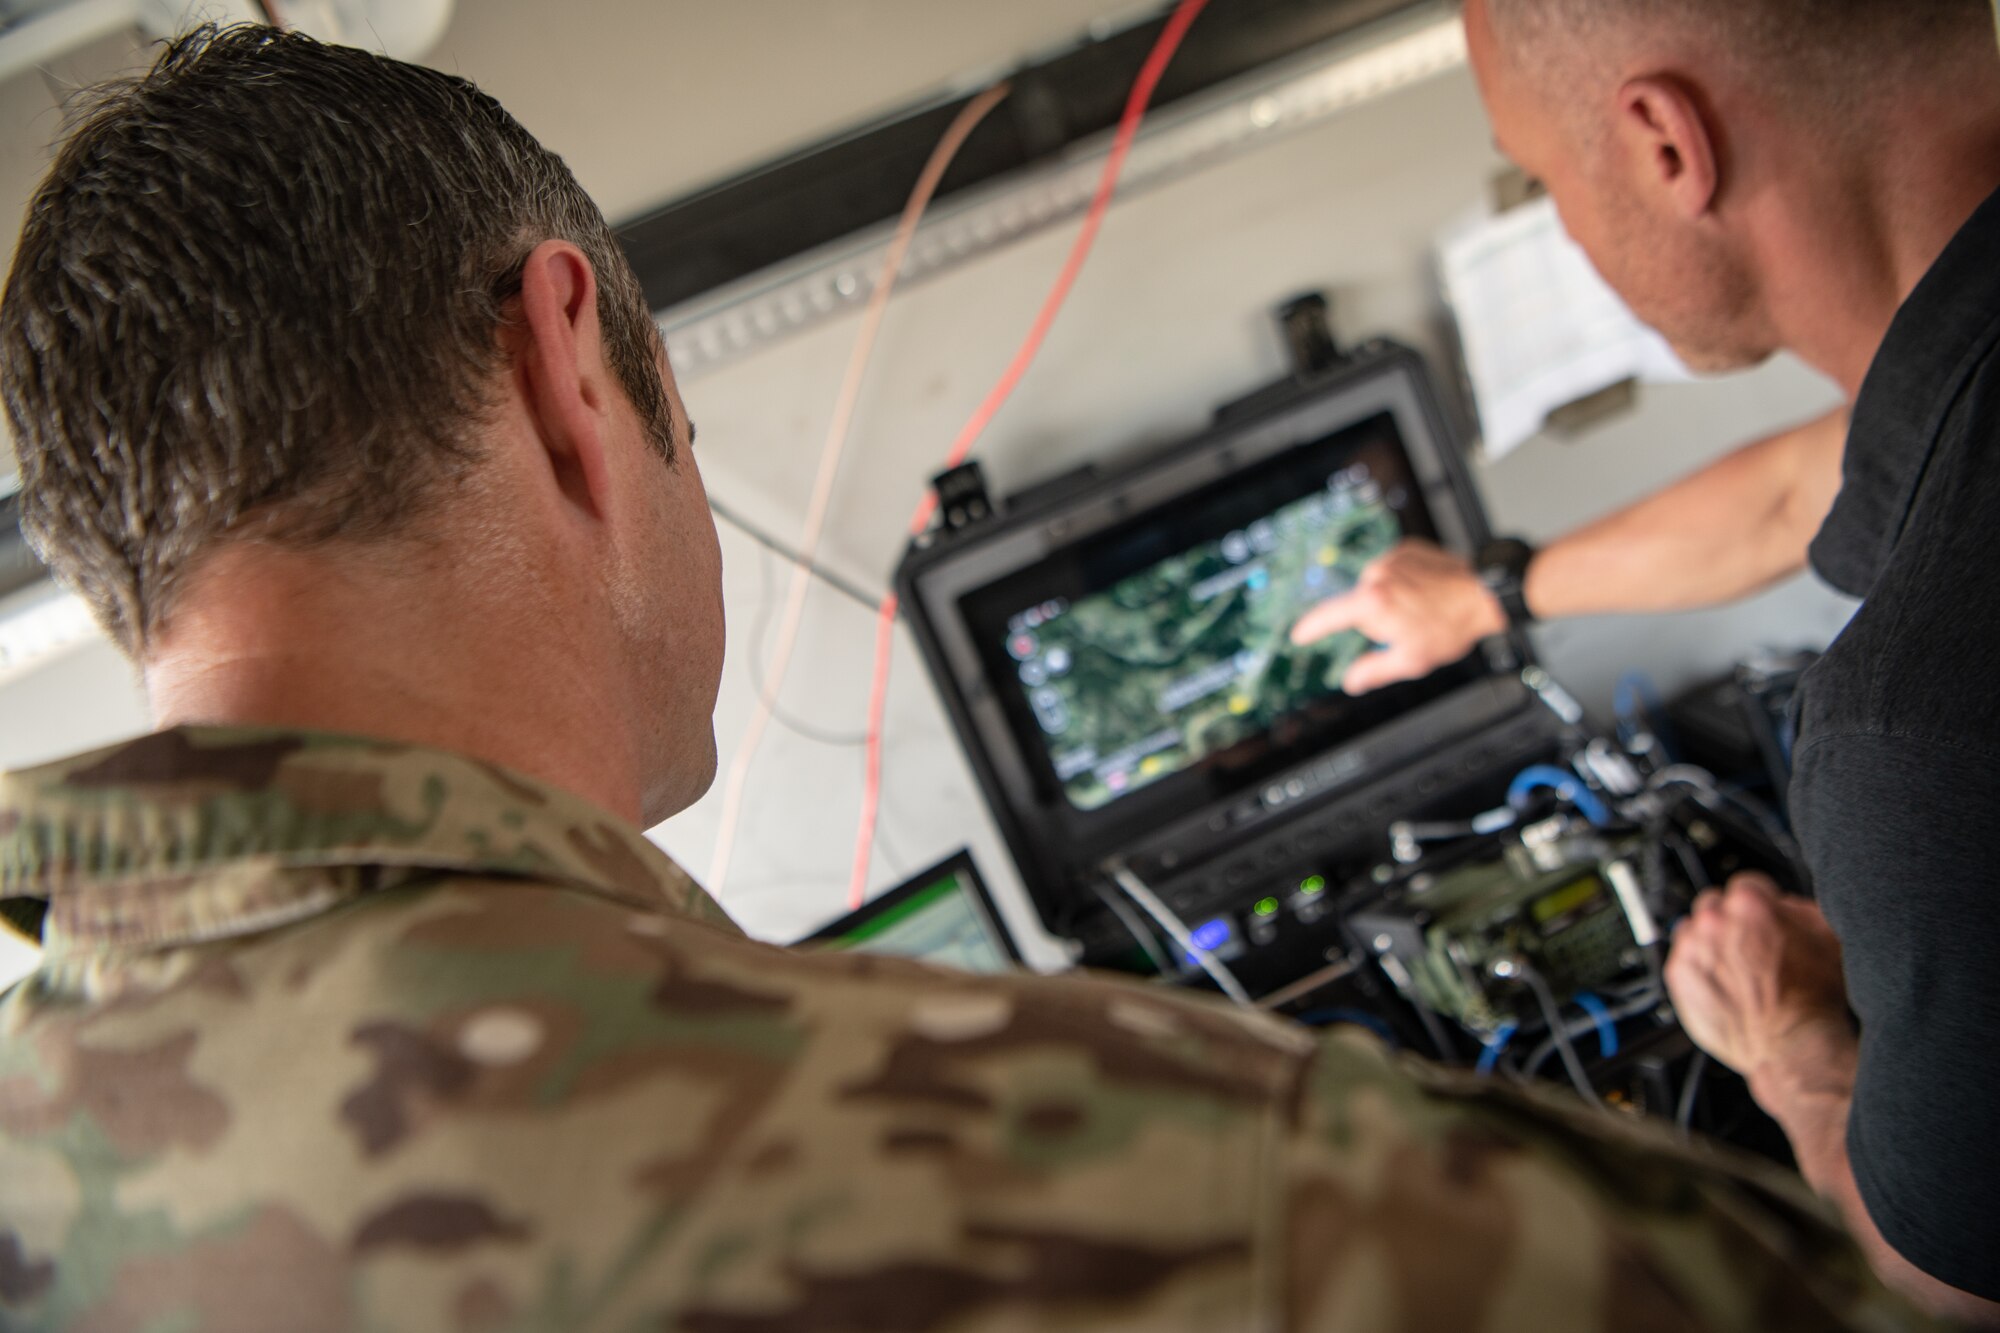 U.S. Air Force Master Sgt. Paul Hebb, left, operations superintendent, and Senior Master Sgt. Nicholas Altgilbers, senior enlisted leader, both with the 146th Air Support Operations Squadron, 137th Special Operations Wing, Oklahoma National Guard monitor data transmissions in a mobile tactical operations center during exercise Air Defender 2023 (AD23) in Germany June 19, 2023. Exercise AD23 is a German-led exercise that integrates both U.S. and Allied air-power to defend shared values, while leveraging and strengthening vital partnerships to deter aggression around the world. (U.S. Air National Guard photo by Tech. Sgt. Brigette Waltermire)